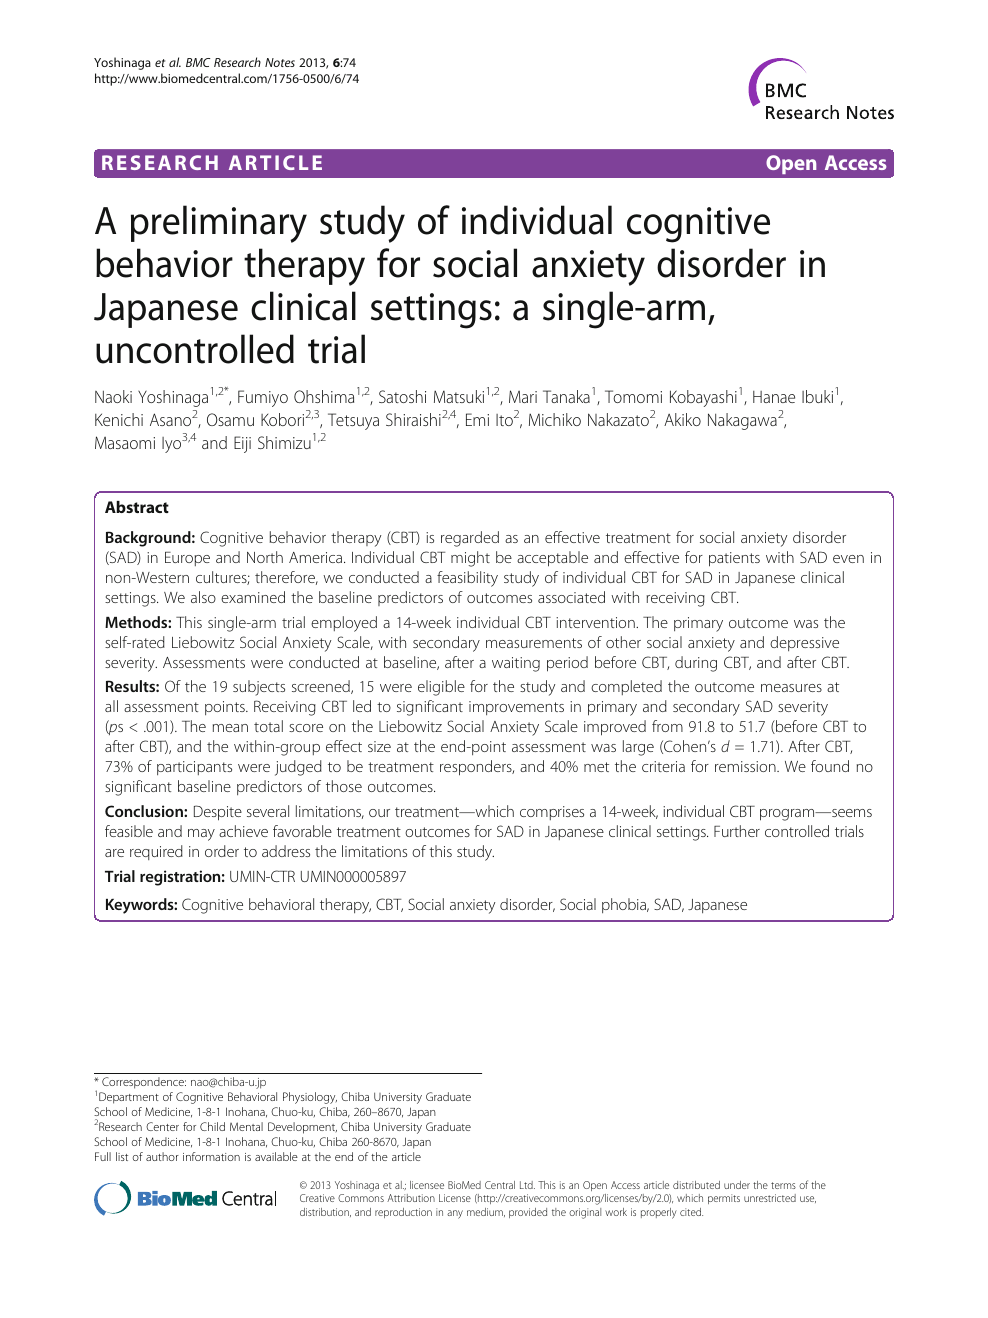 A Preliminary Study Of Individual Cognitive Behavior Therapy